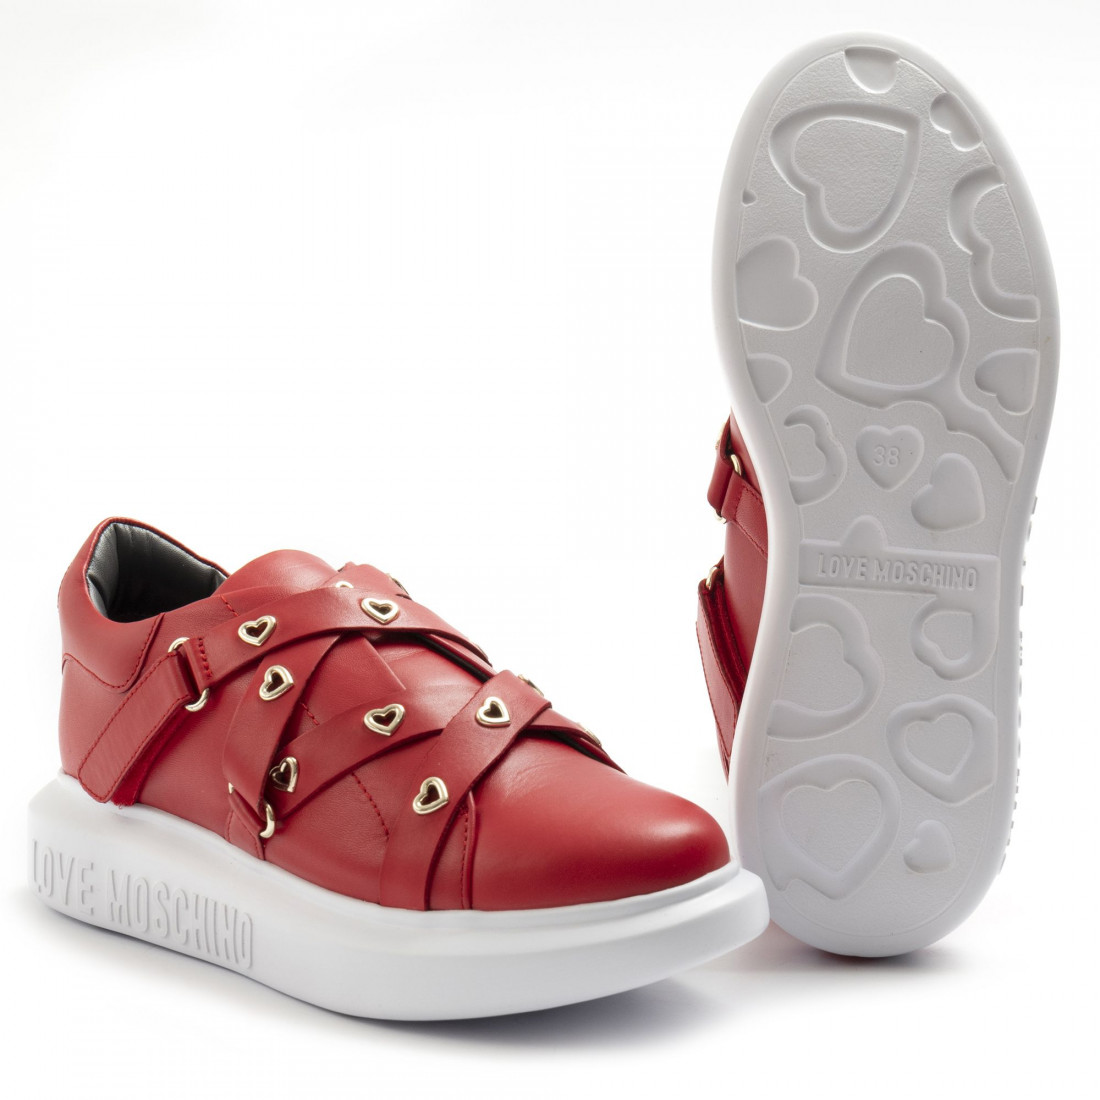 love moschino red sneakers